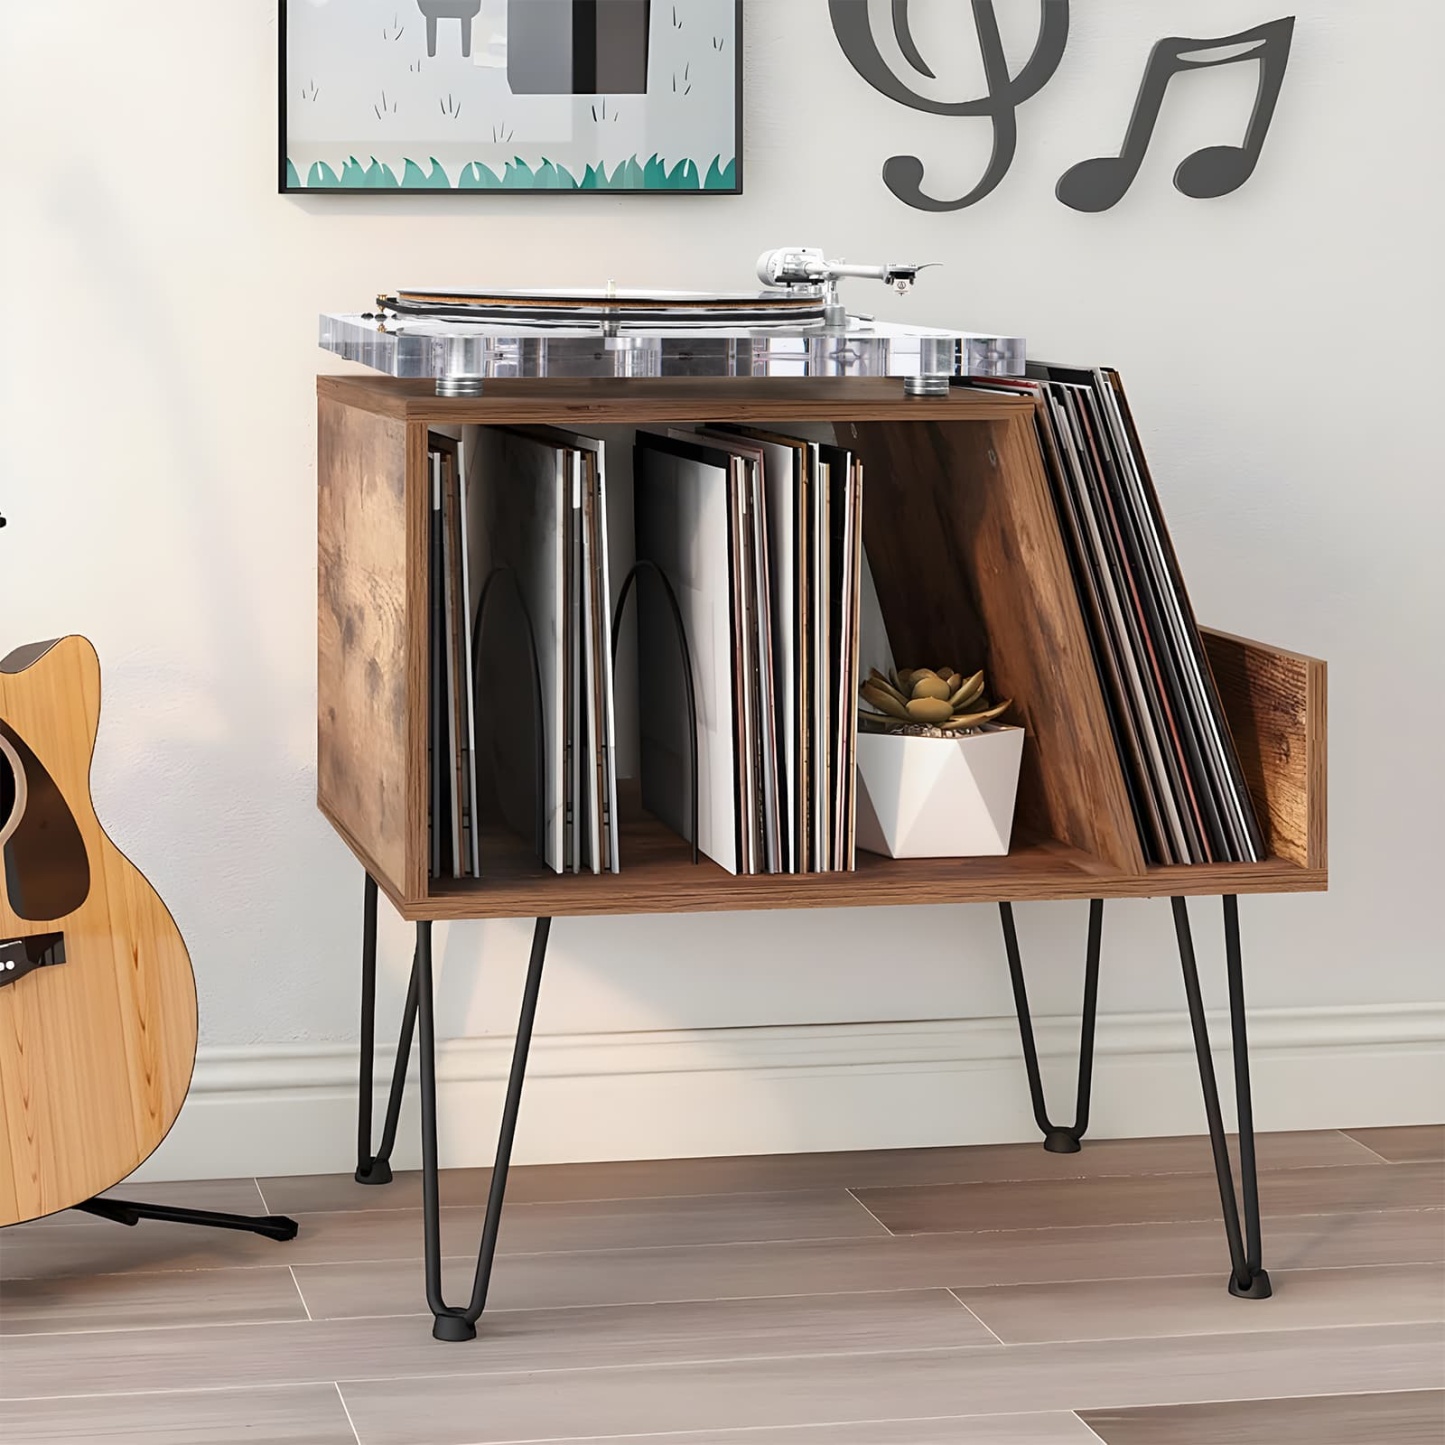 Retrolife Vinyl Record Player Stand Turntable Stand LPs Album Storage Cabinet for Bedroom Living Room Office RMD2 